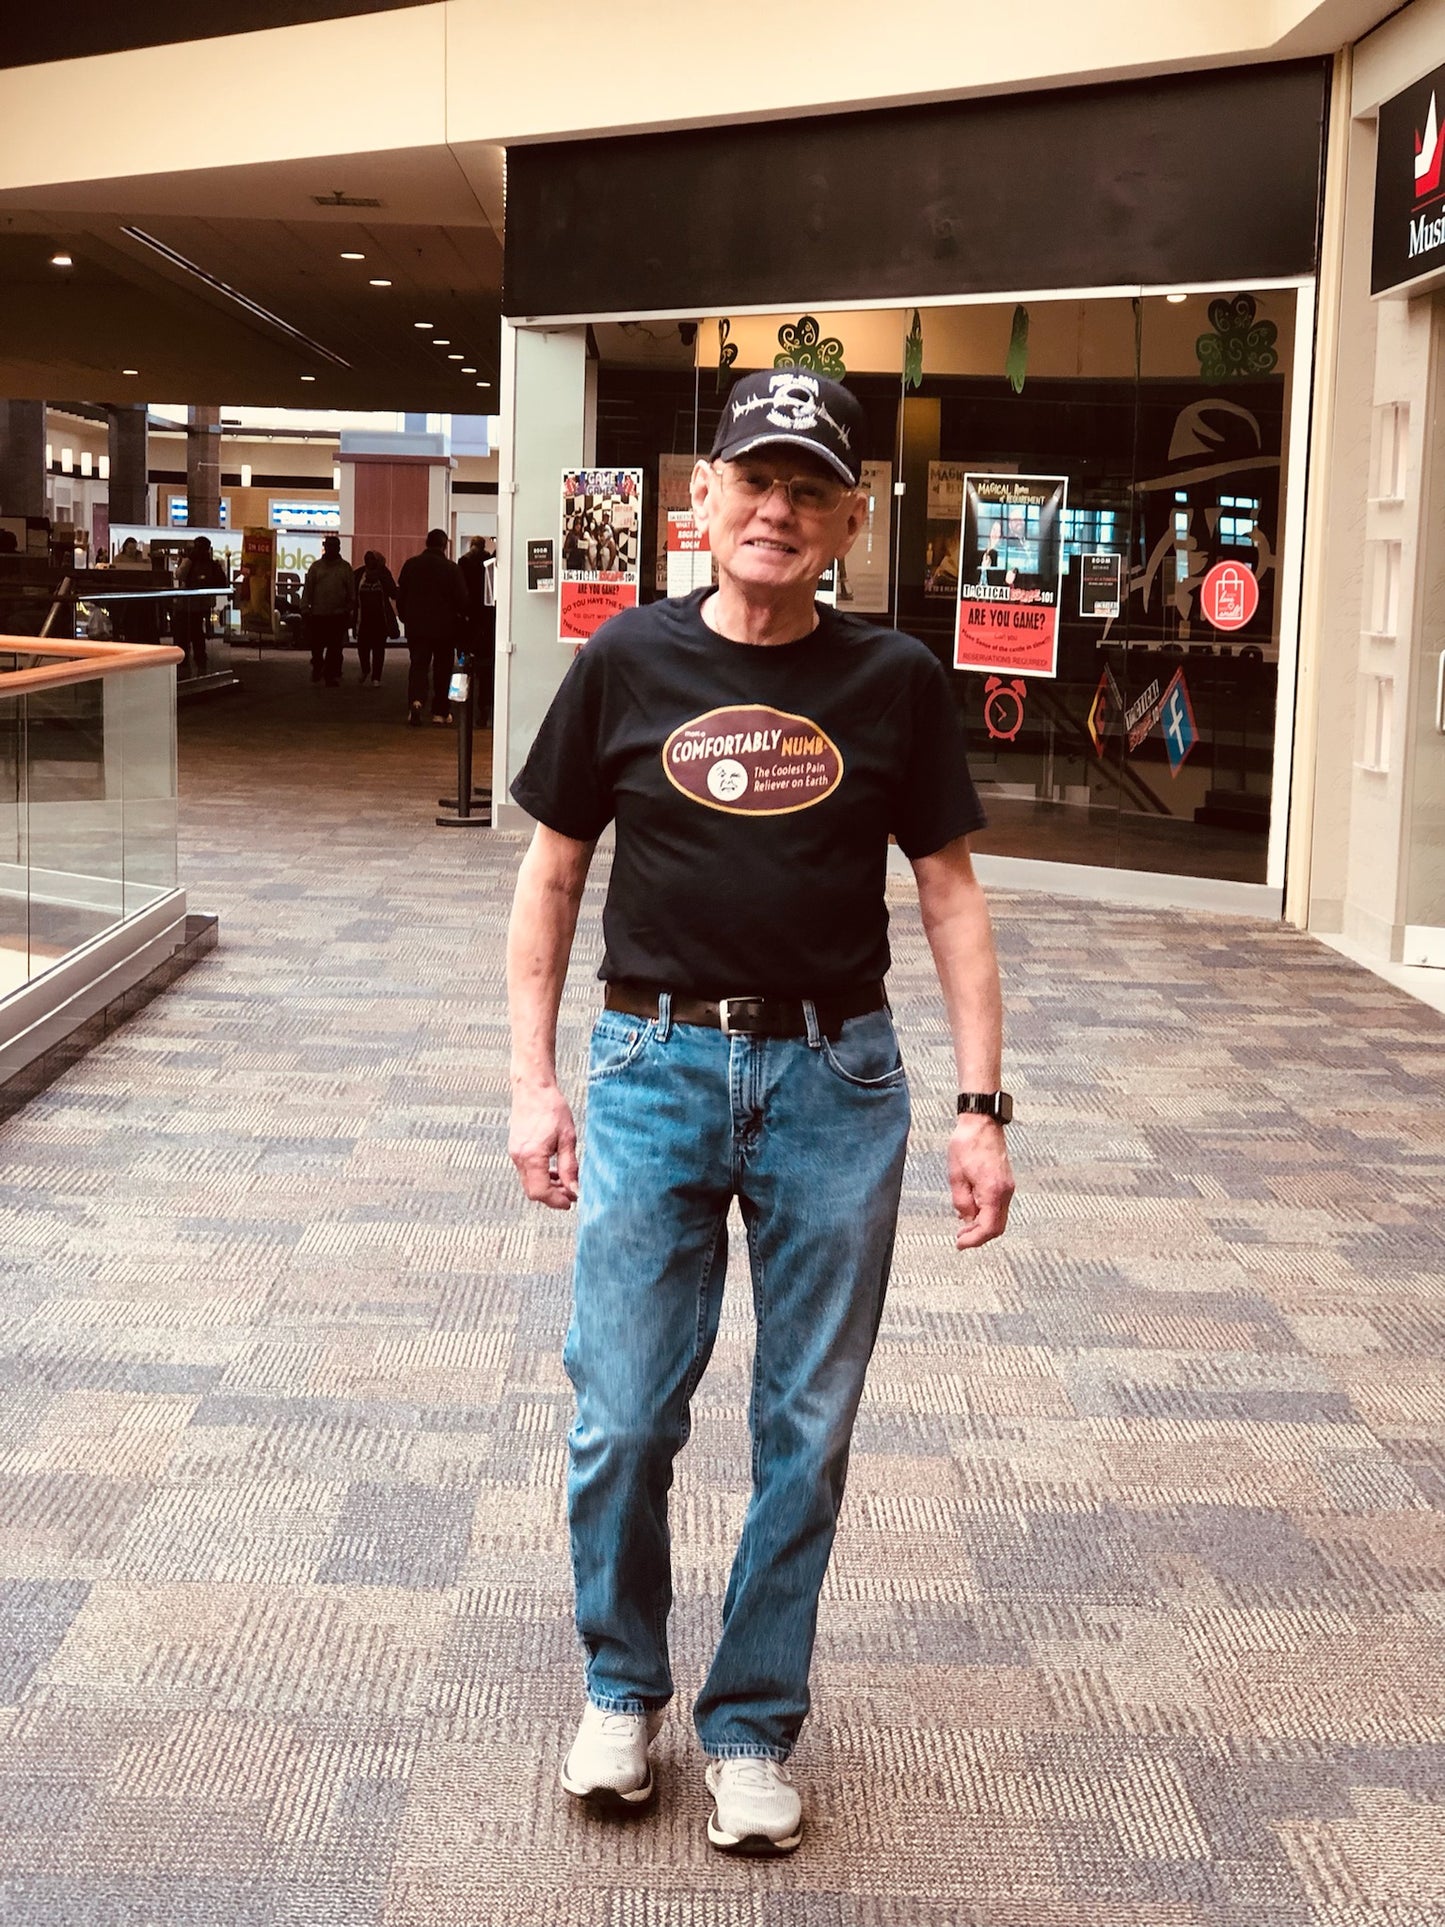 Mall Walkers know how to sport their favorite T-shirt. Using Comfortably Numb helps keep Dennis out-walking all of the other old cronies at the mall.